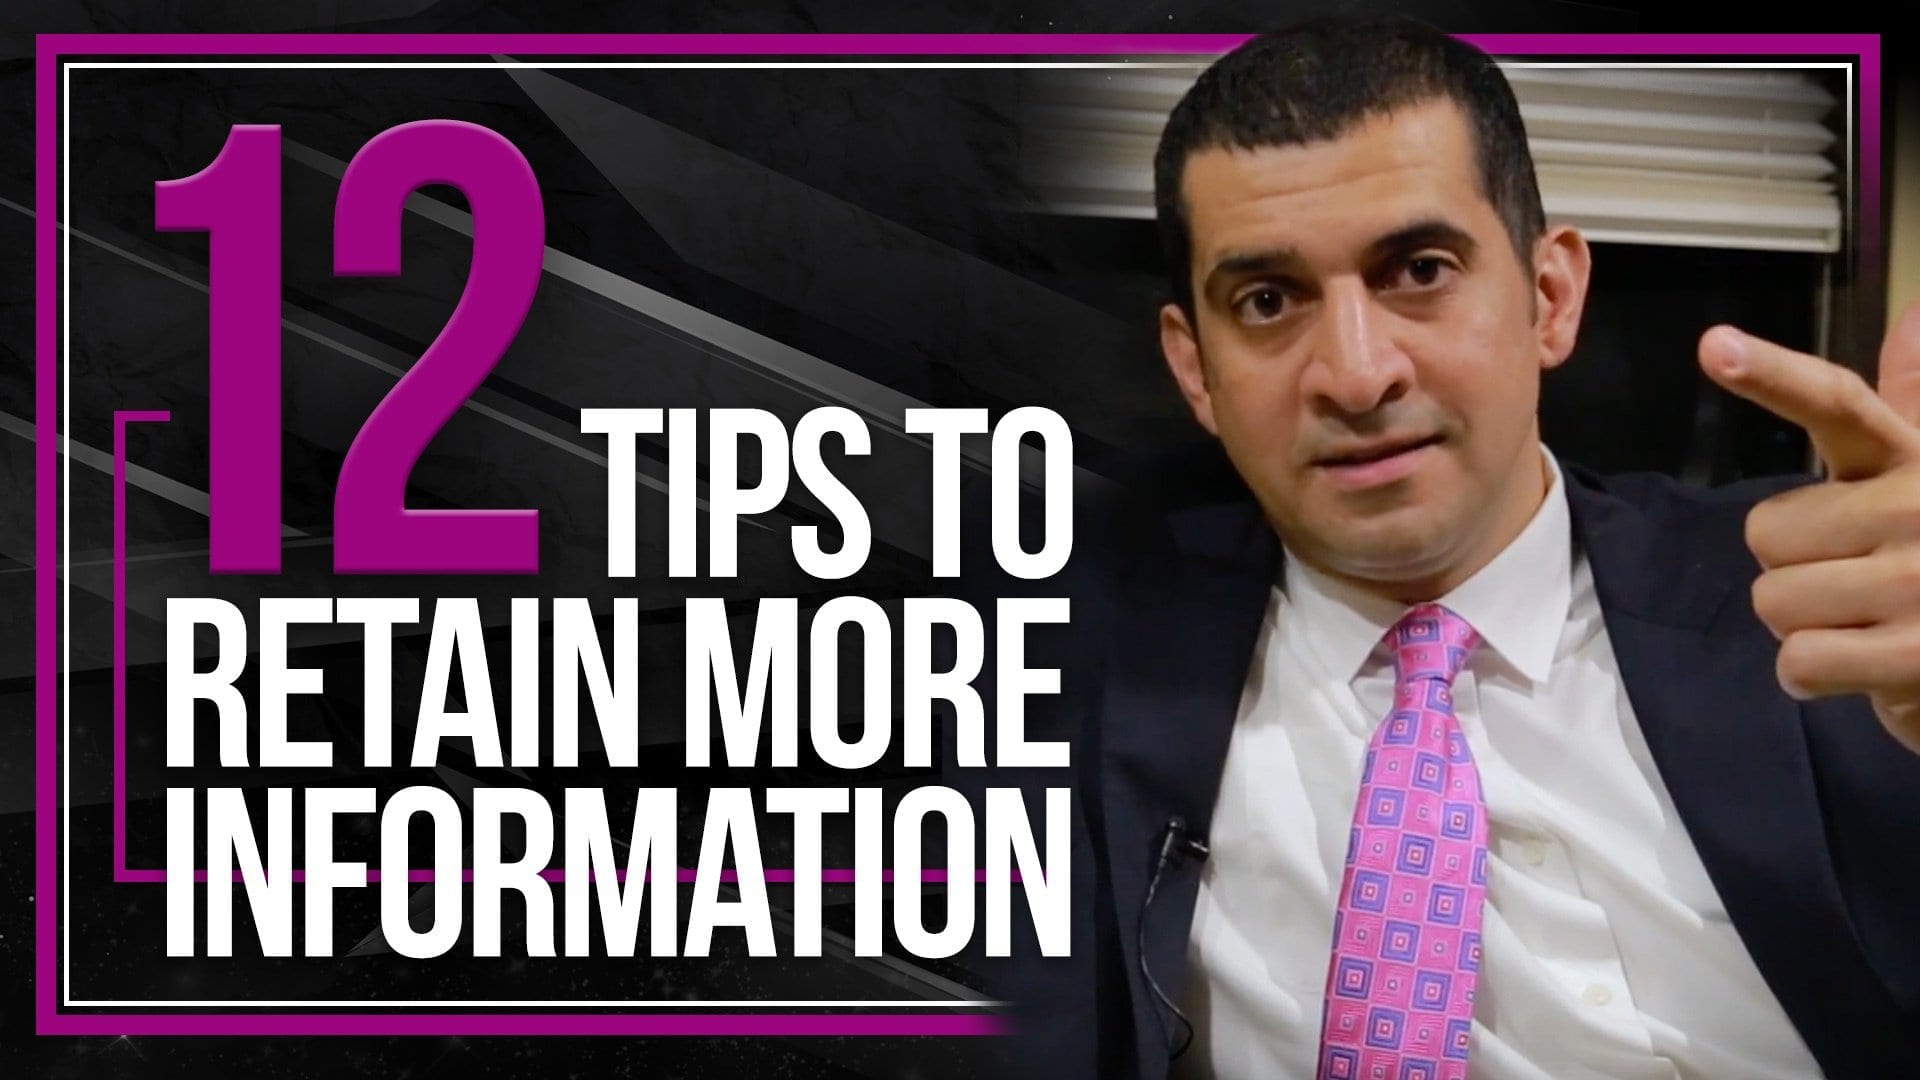 Do you forget things soon after reading or listening to them? Do you want to improve your memory? In this video, I share 12 tips to retain more information.